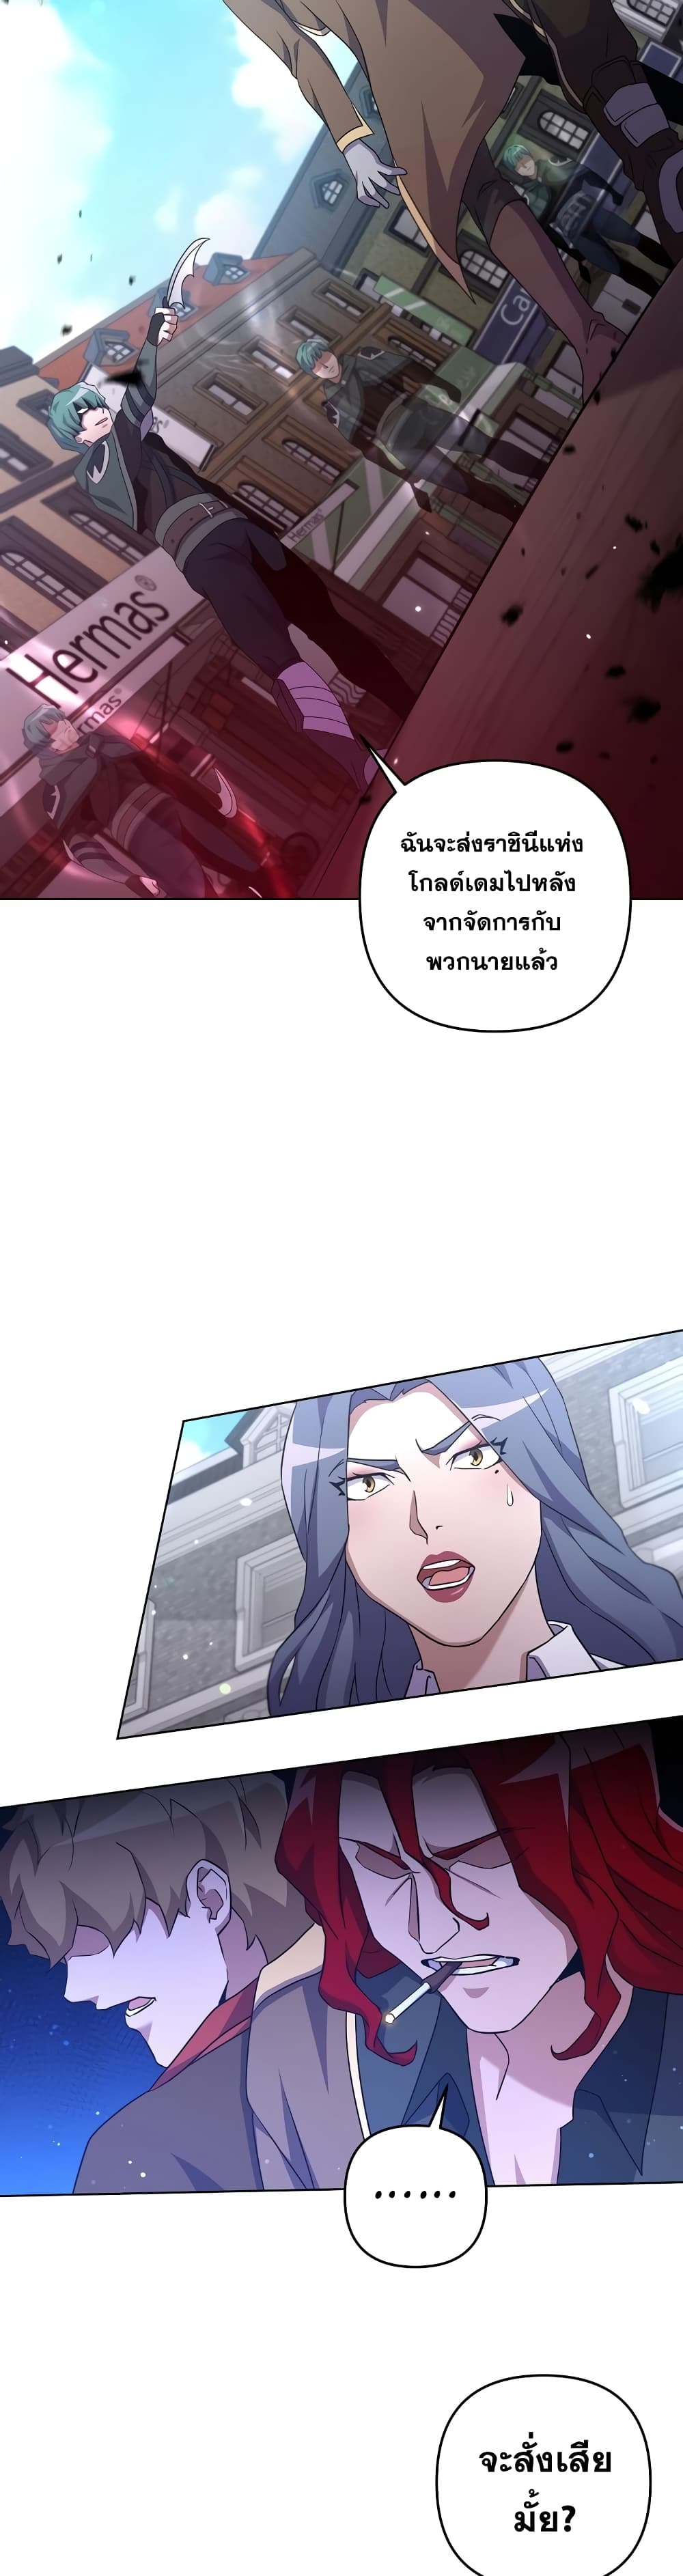 Surviving in an Action Manhwa ตอนที่ 26 (27)